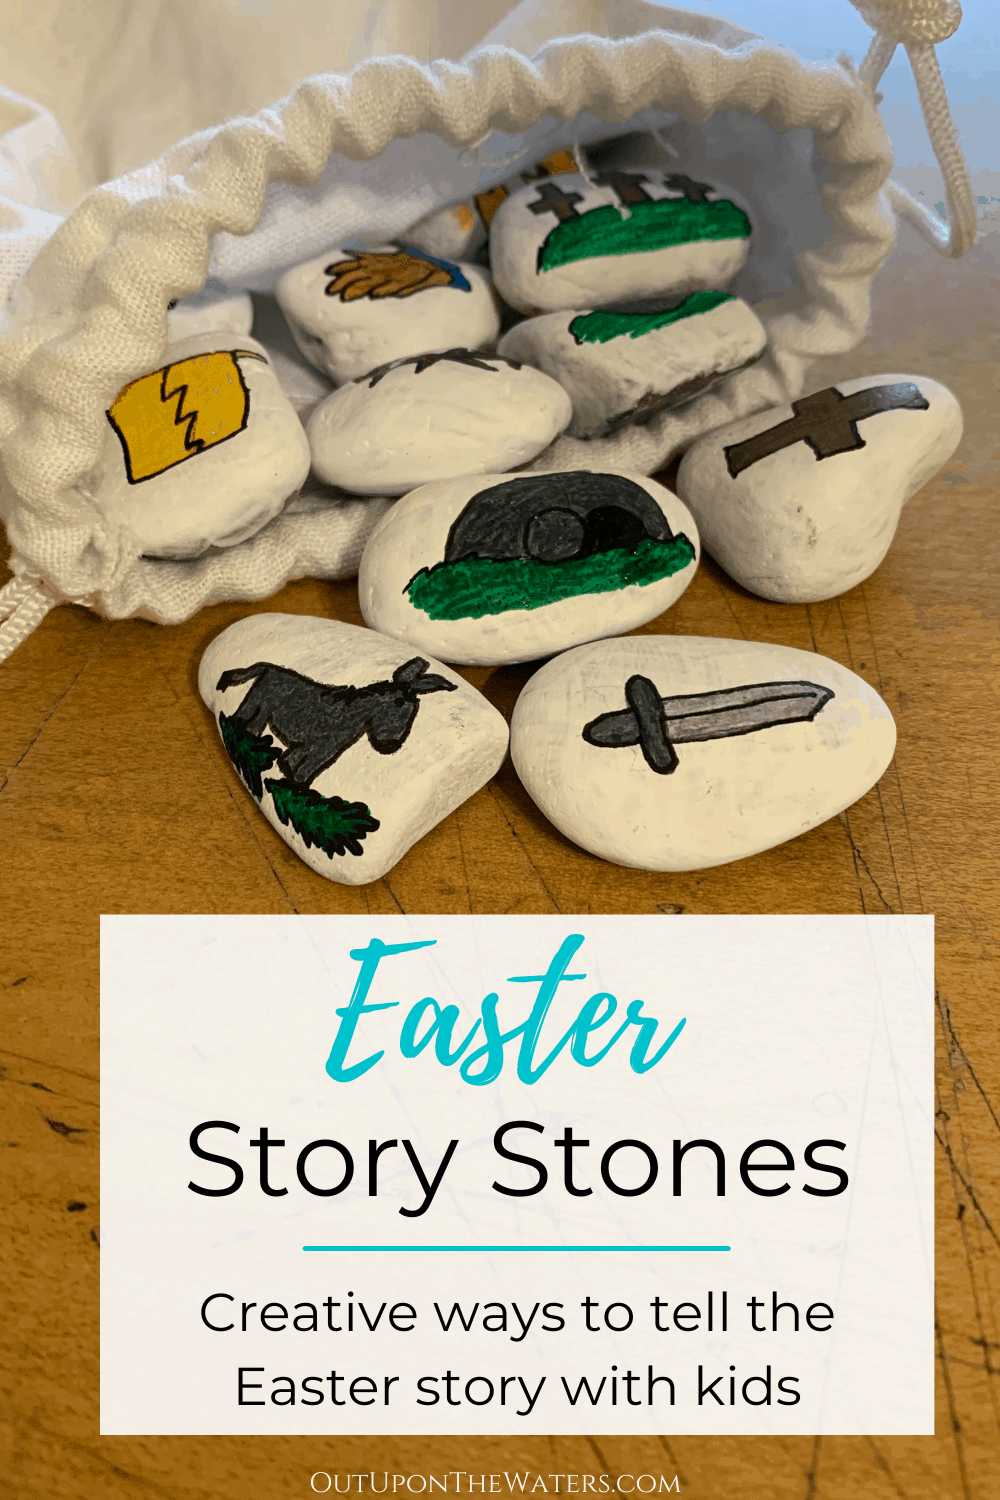 How to Make Easter Story Stones - Out Upon the Waters